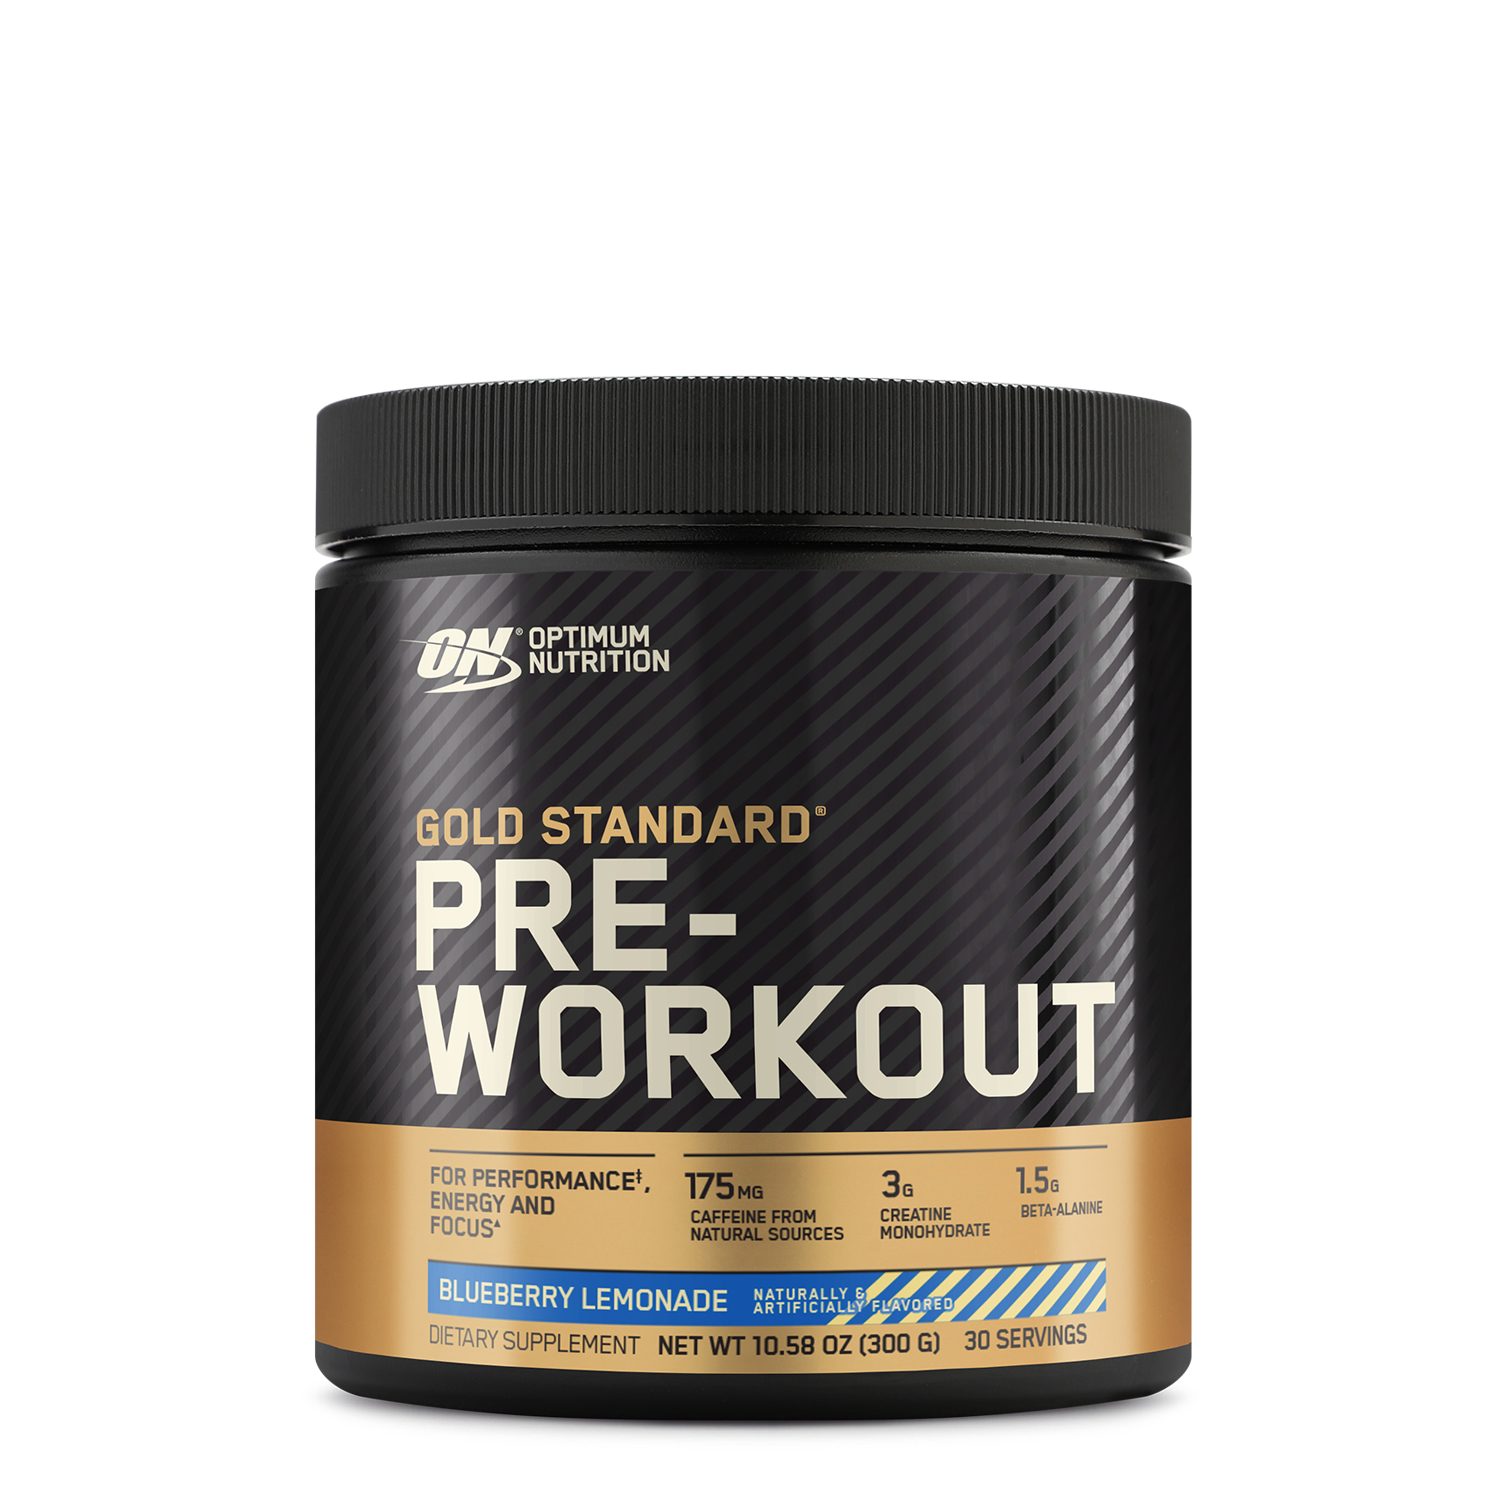 15 Minute Can i mix creatine with my pre workout for Women